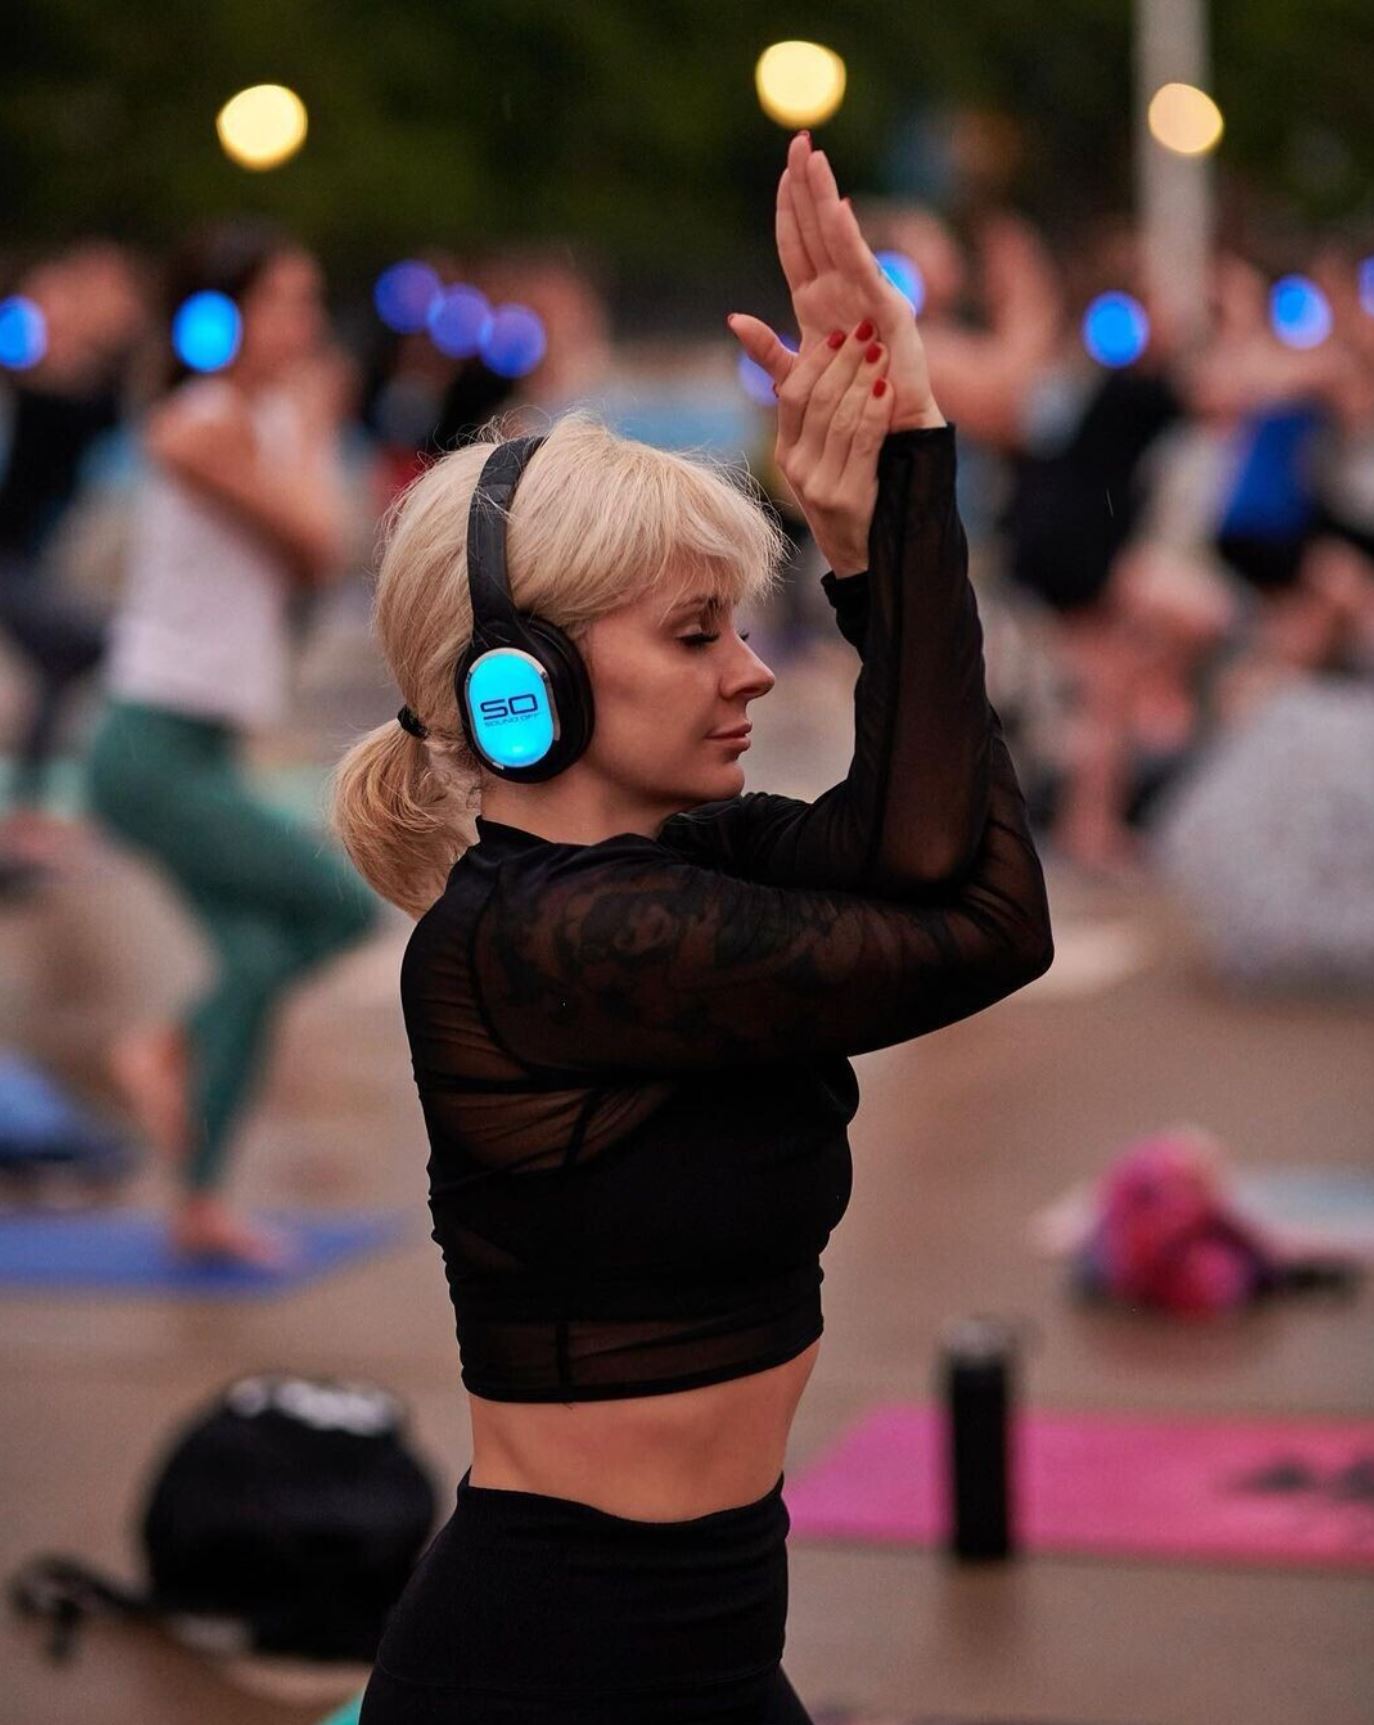 Woman in a yoga pose during a silent disco event